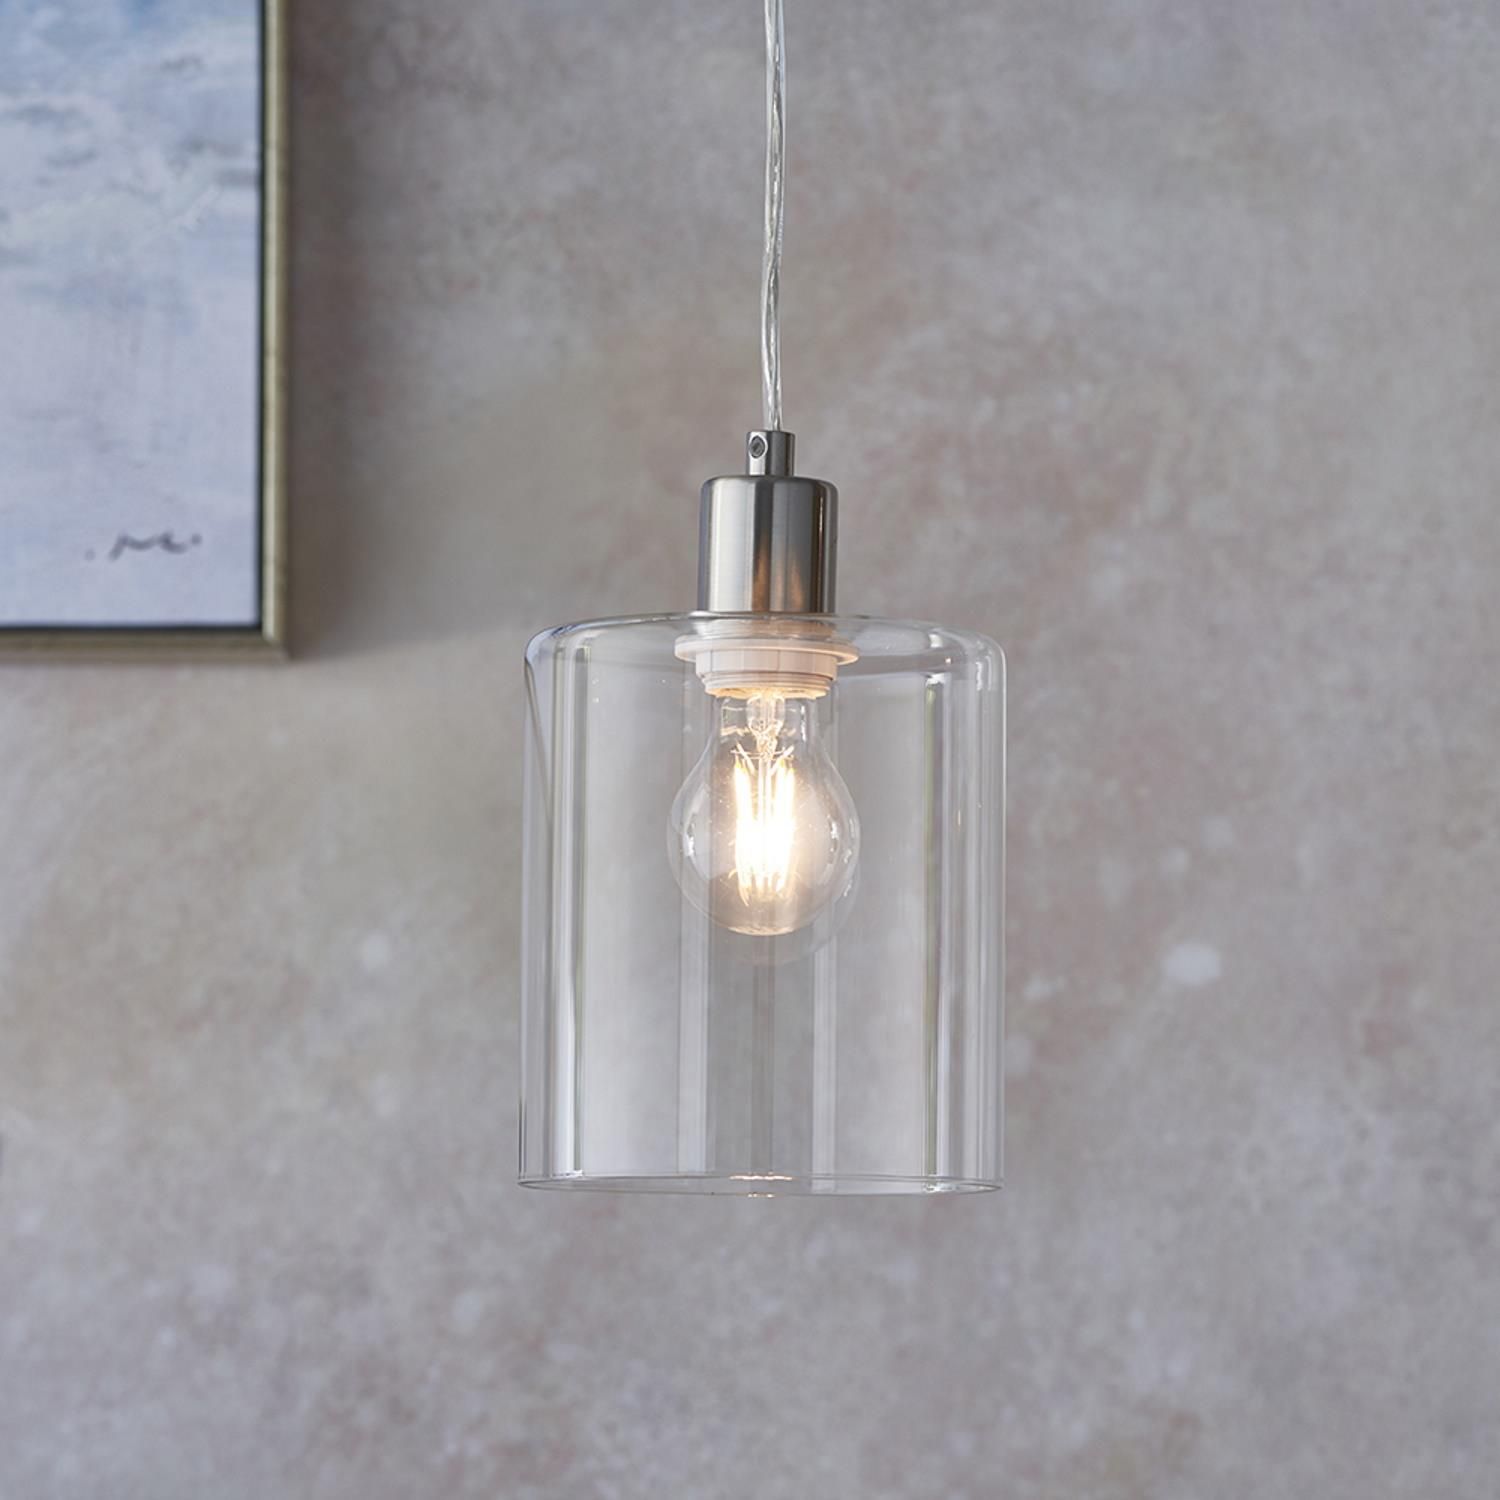 Toledo Brushed Nickel Clear Glass Pendant 90563 | The With Regard To Brushed Nickel Pendant Lights (View 10 of 15)